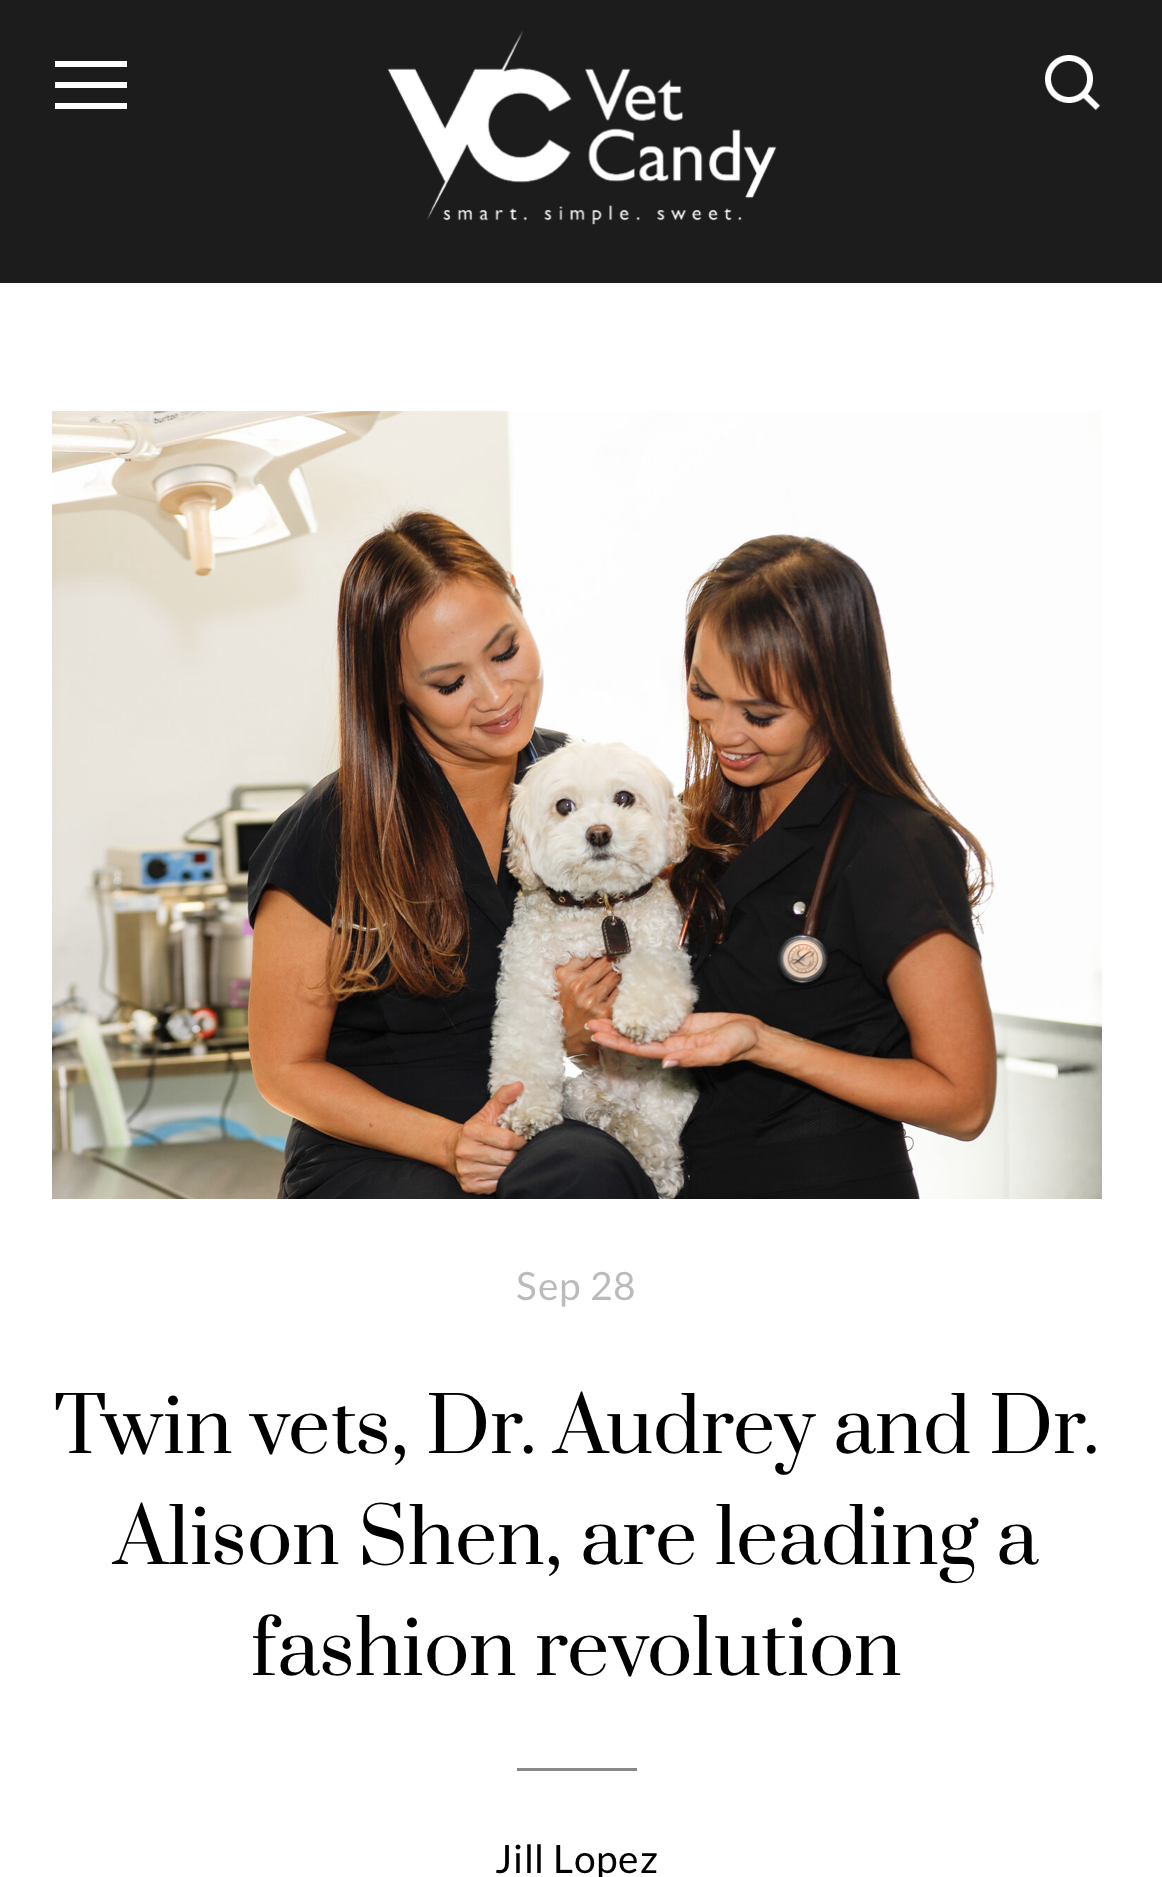 Twin vets, Dr. Audrey and Dr. Alison Shen, are leading a fashion revolution